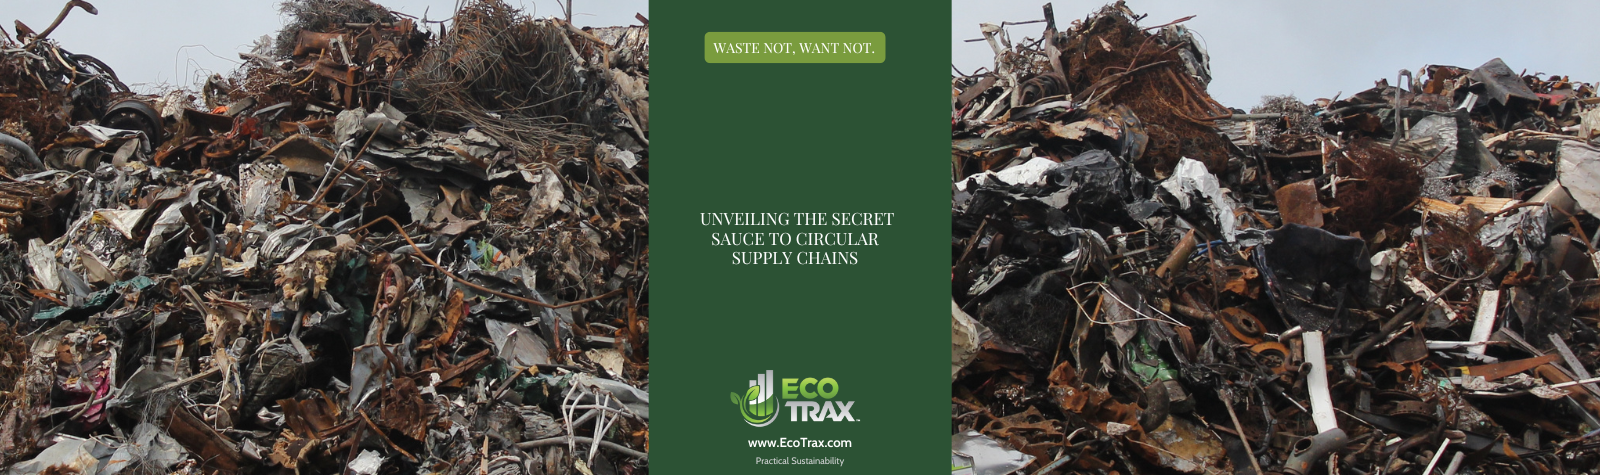 Waste Not, Want Not: Unveiling the Secret Sauce to Circular Supply Chains